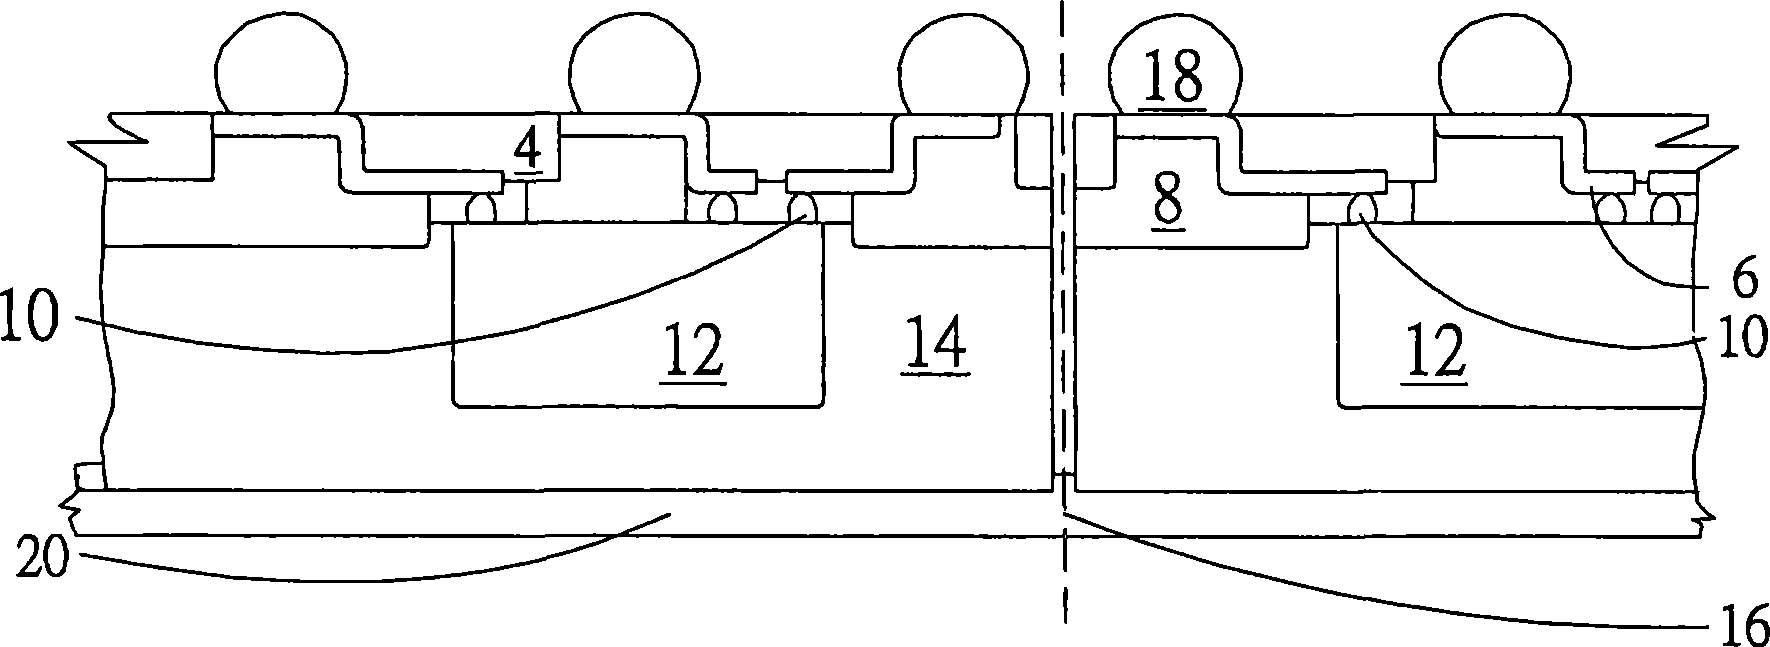 Stereo electronic packaging structure containing conduction support base material